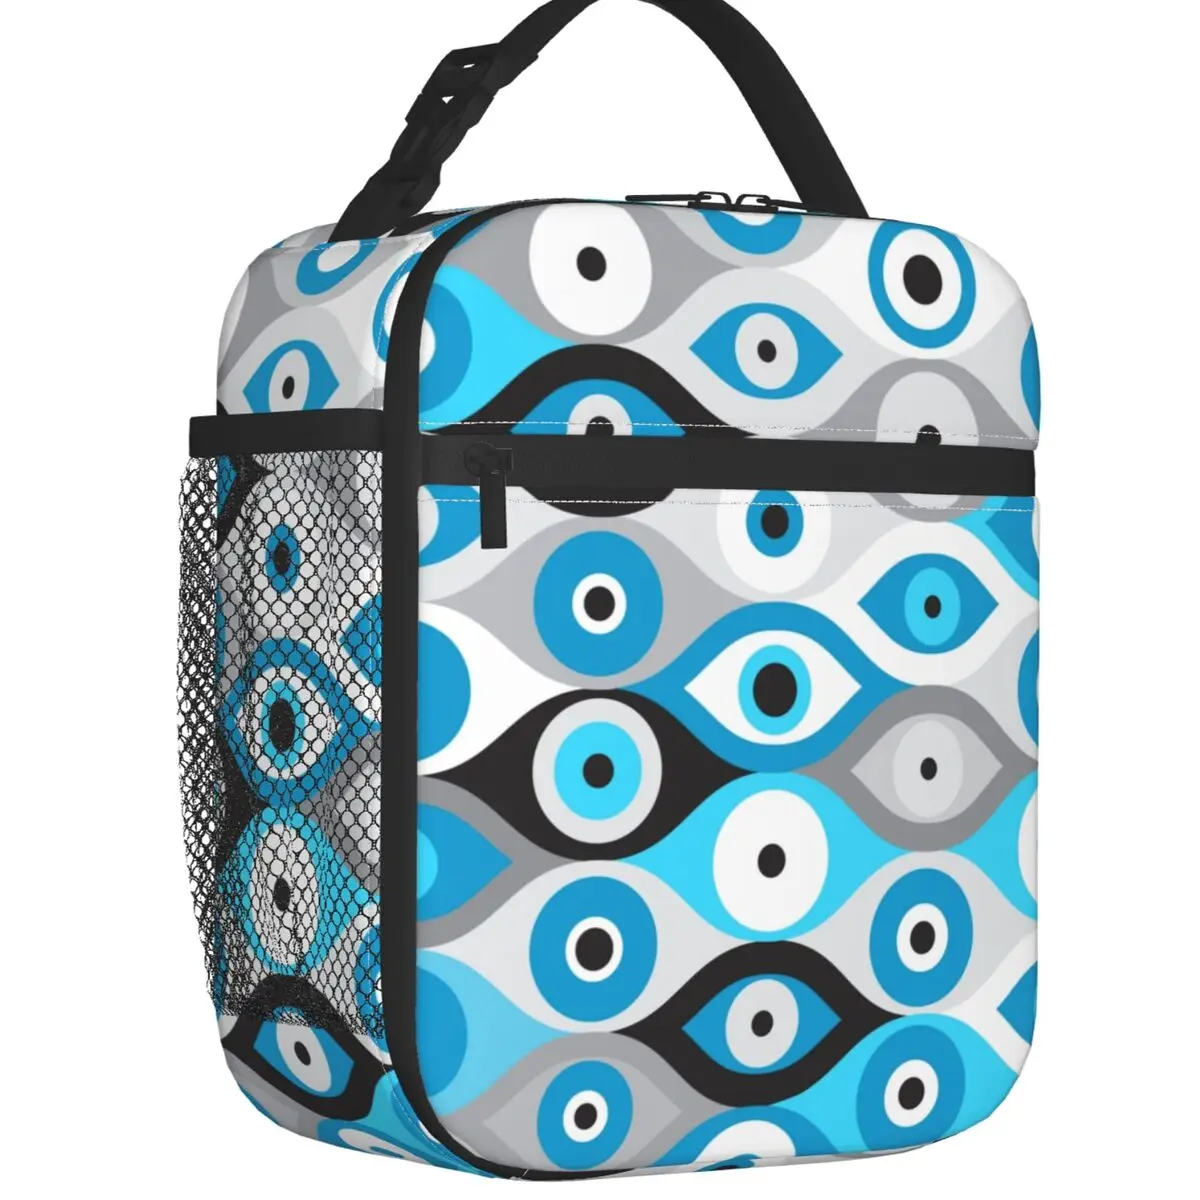 Greek Evil Eye Pattern Blues And Greys Insulated Lunch Tote Bag Nazar Amulet Boho Portable Thermal Cooler Food Lunch Box School